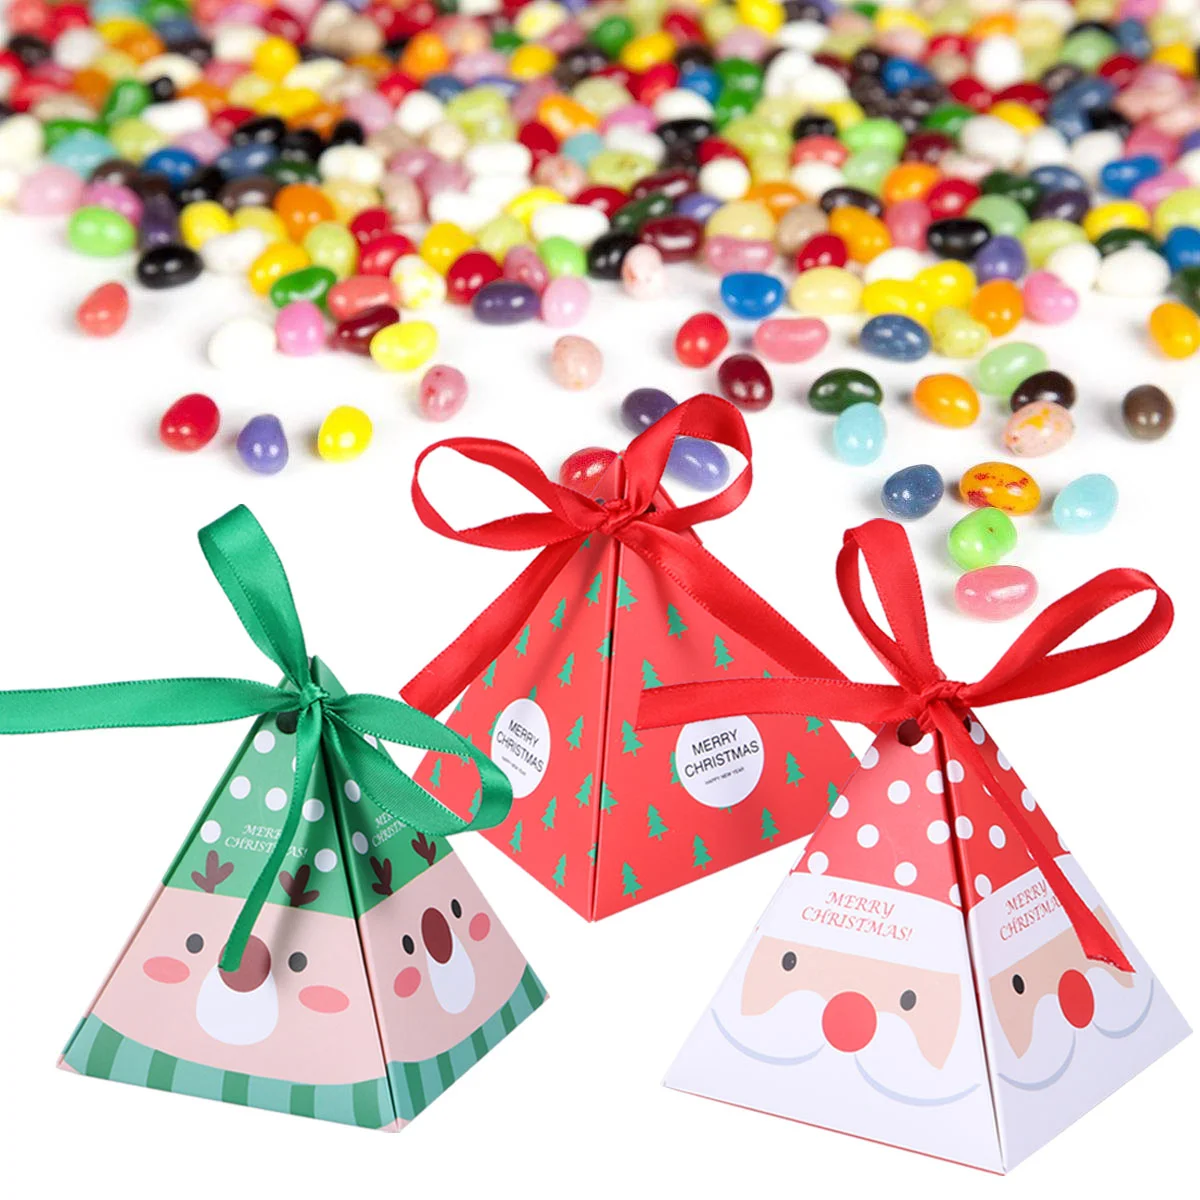 

Boxes Christmas Gift Box Candy Holiday Goodie Treat Paper Cookie Presents Favors Party Favor Triangle 3D Santa Wrapping